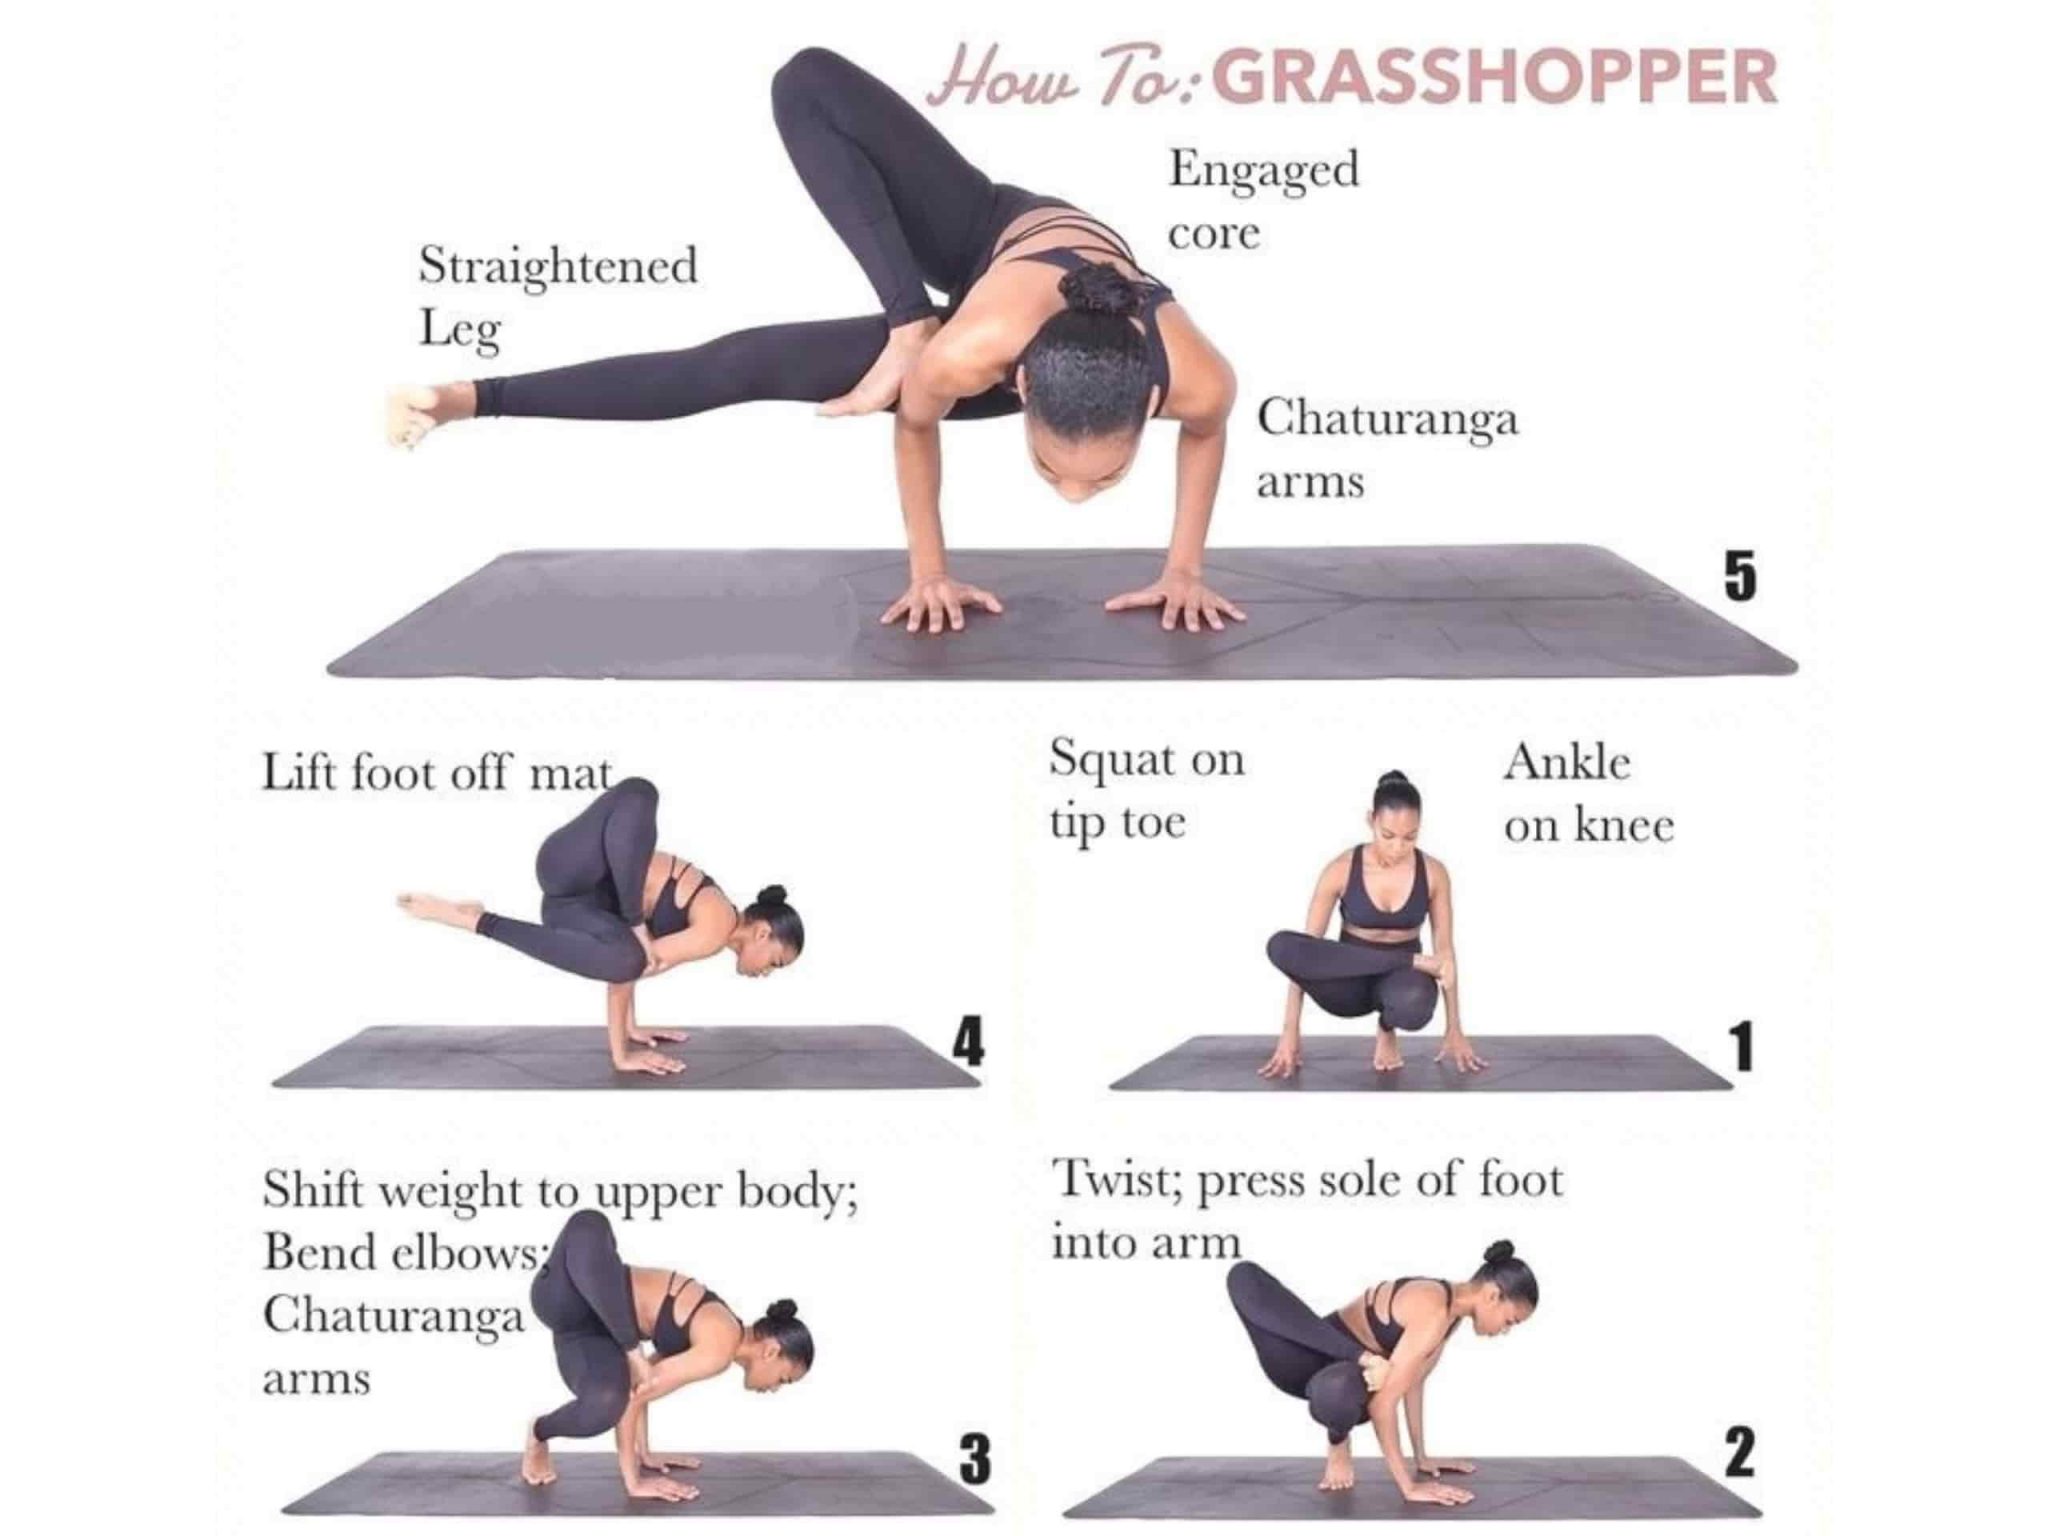 Grasshopper Pose Step-by-Step Instructions And 10 Benefits - SharpMuscle